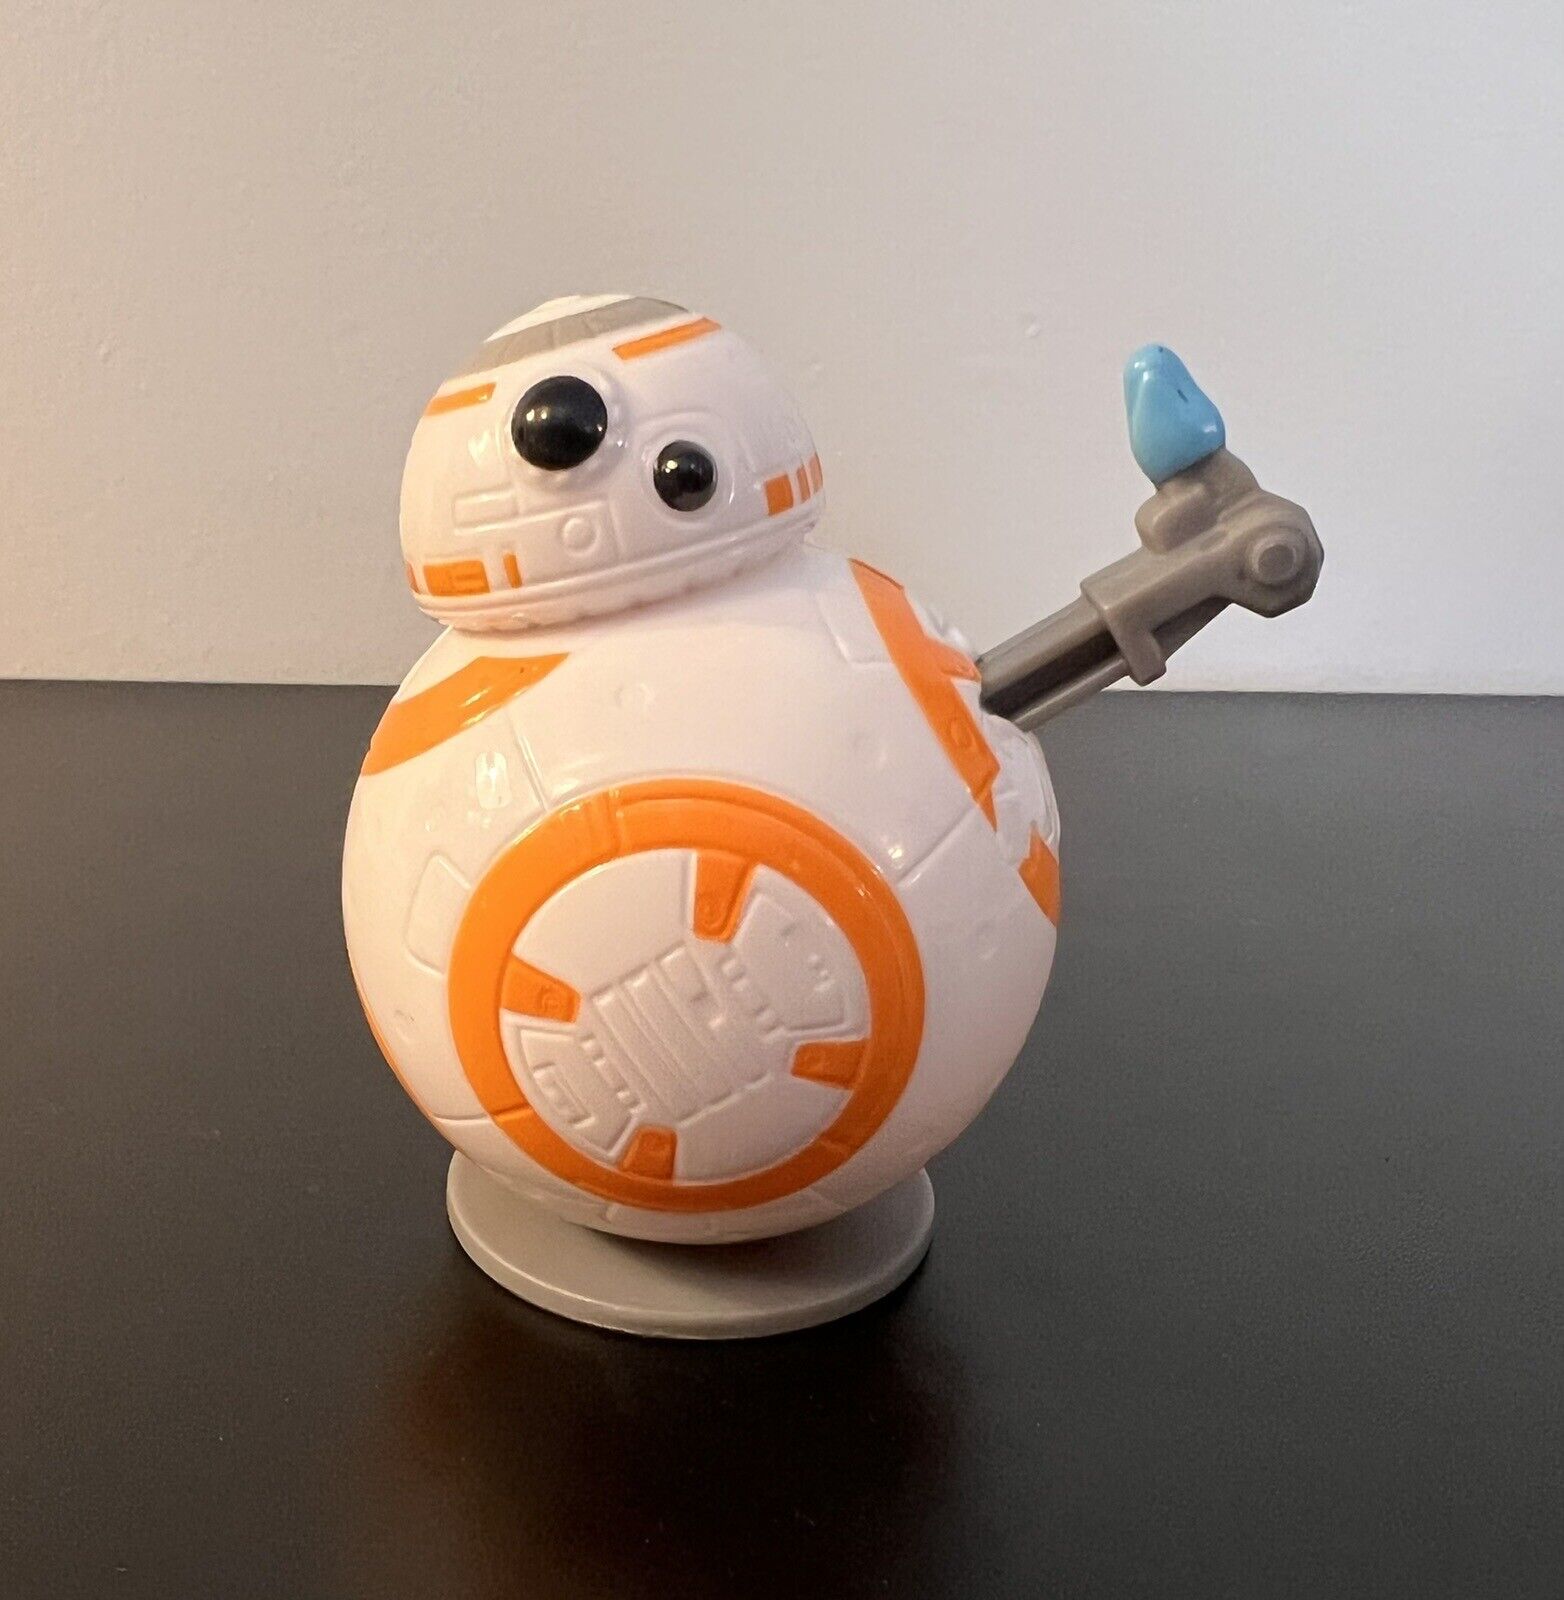 2021 McDonalds BB-8 Star Wars Droid Happy Meal Toy Figure Collectible Disney